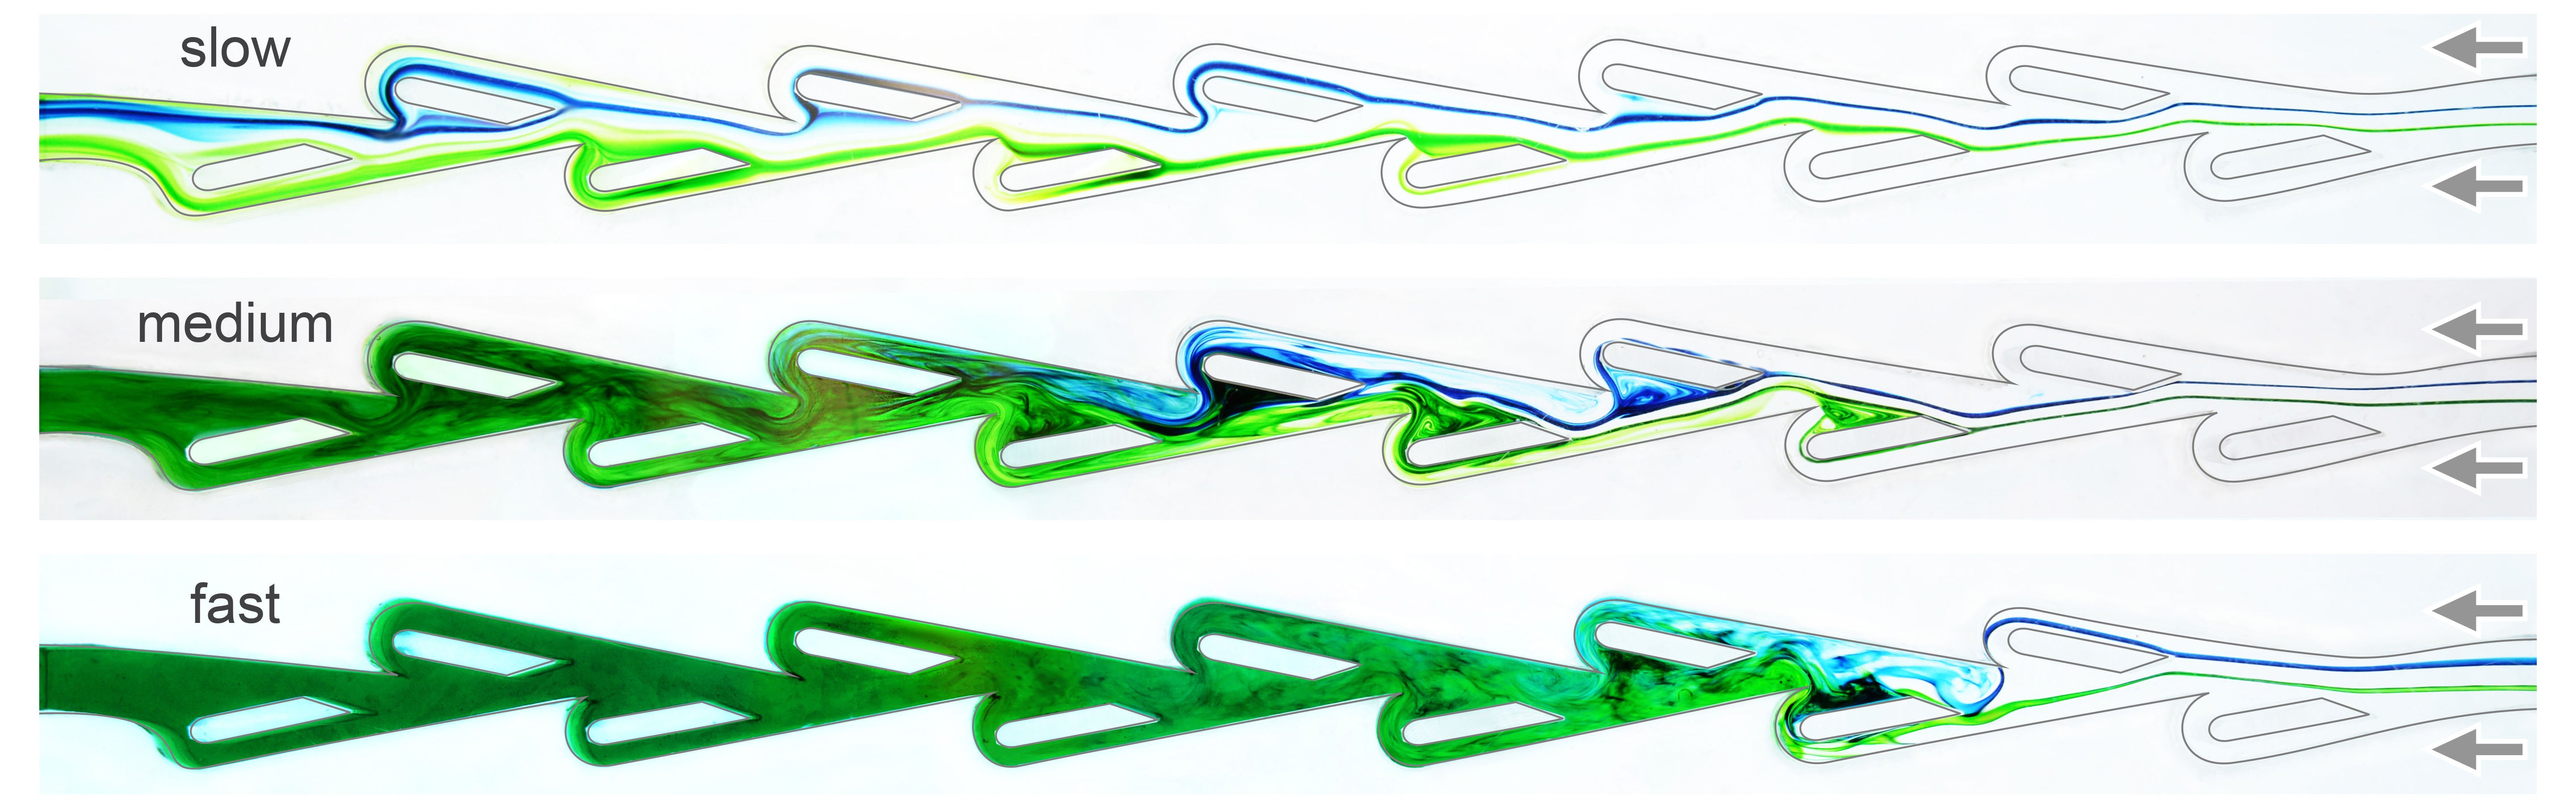 Comparison of flows in the reverse direction (right to left) at three different speeds. The water current is visualized with green and blue dyes, showing that the flows are increasingly disrupted at higher speeds